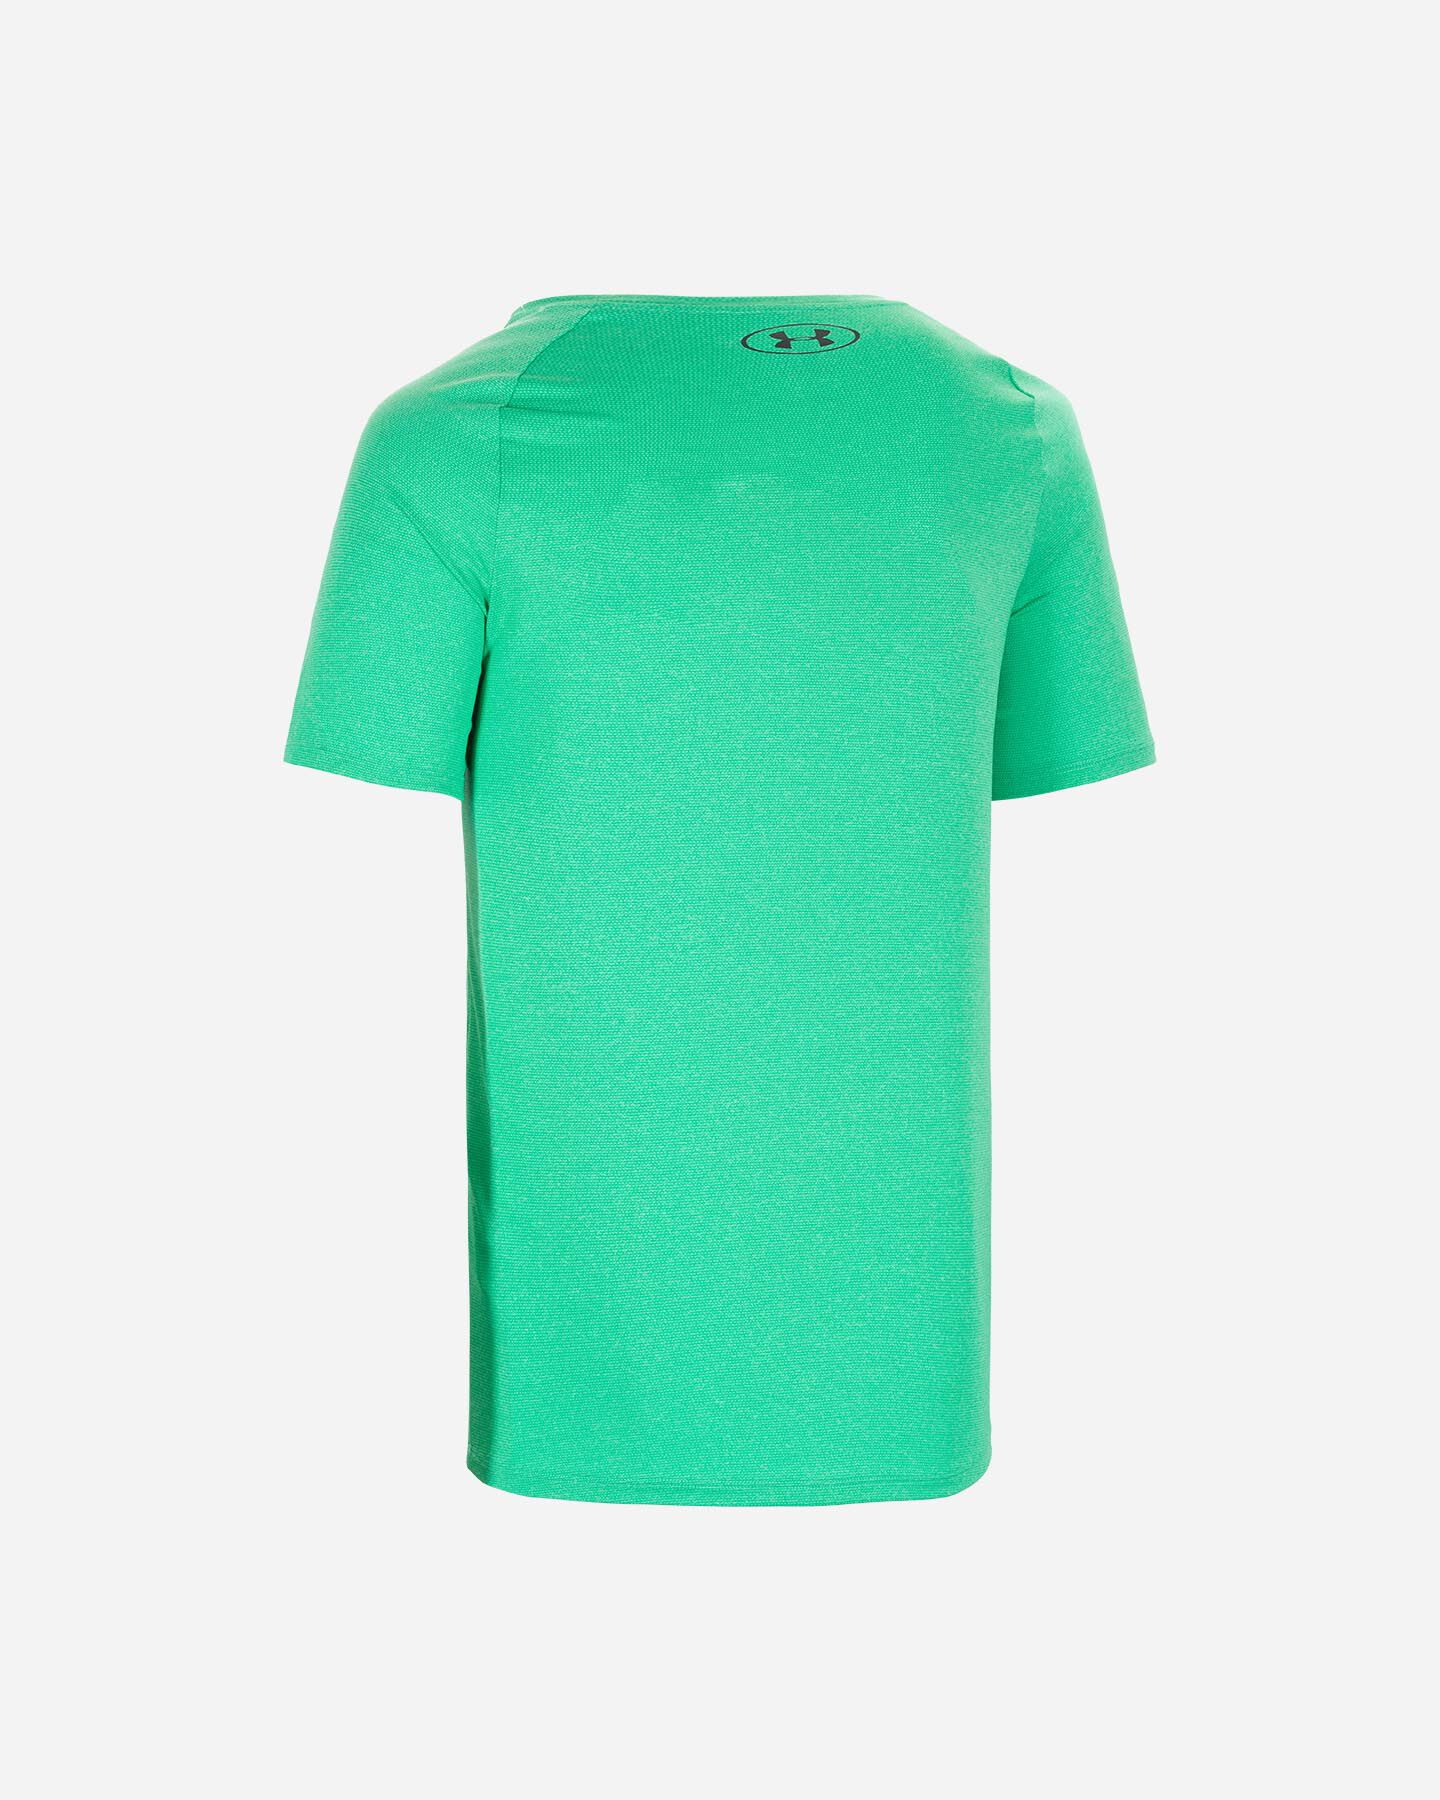  T-Shirt training UNDER ARMOUR TECH 2.0 NOVELTY M S5168621|0299|XS scatto 1